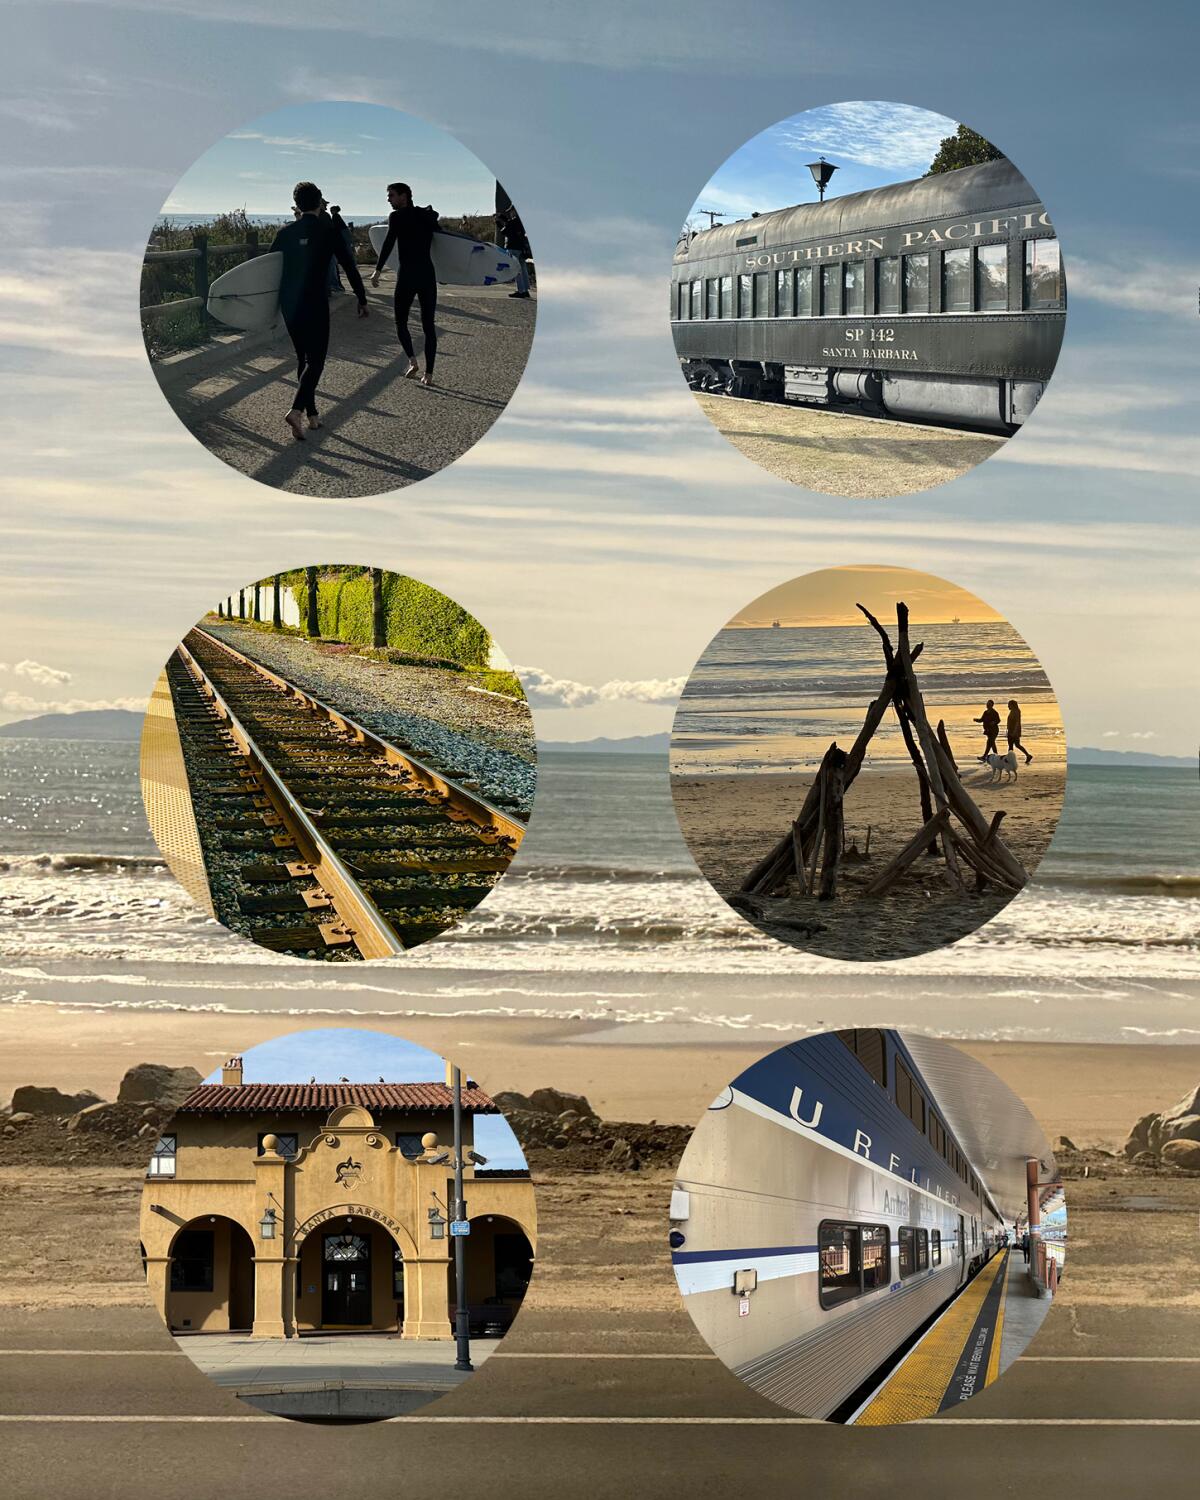 circular photo montage of beach scenes, trains, and weekend destinations